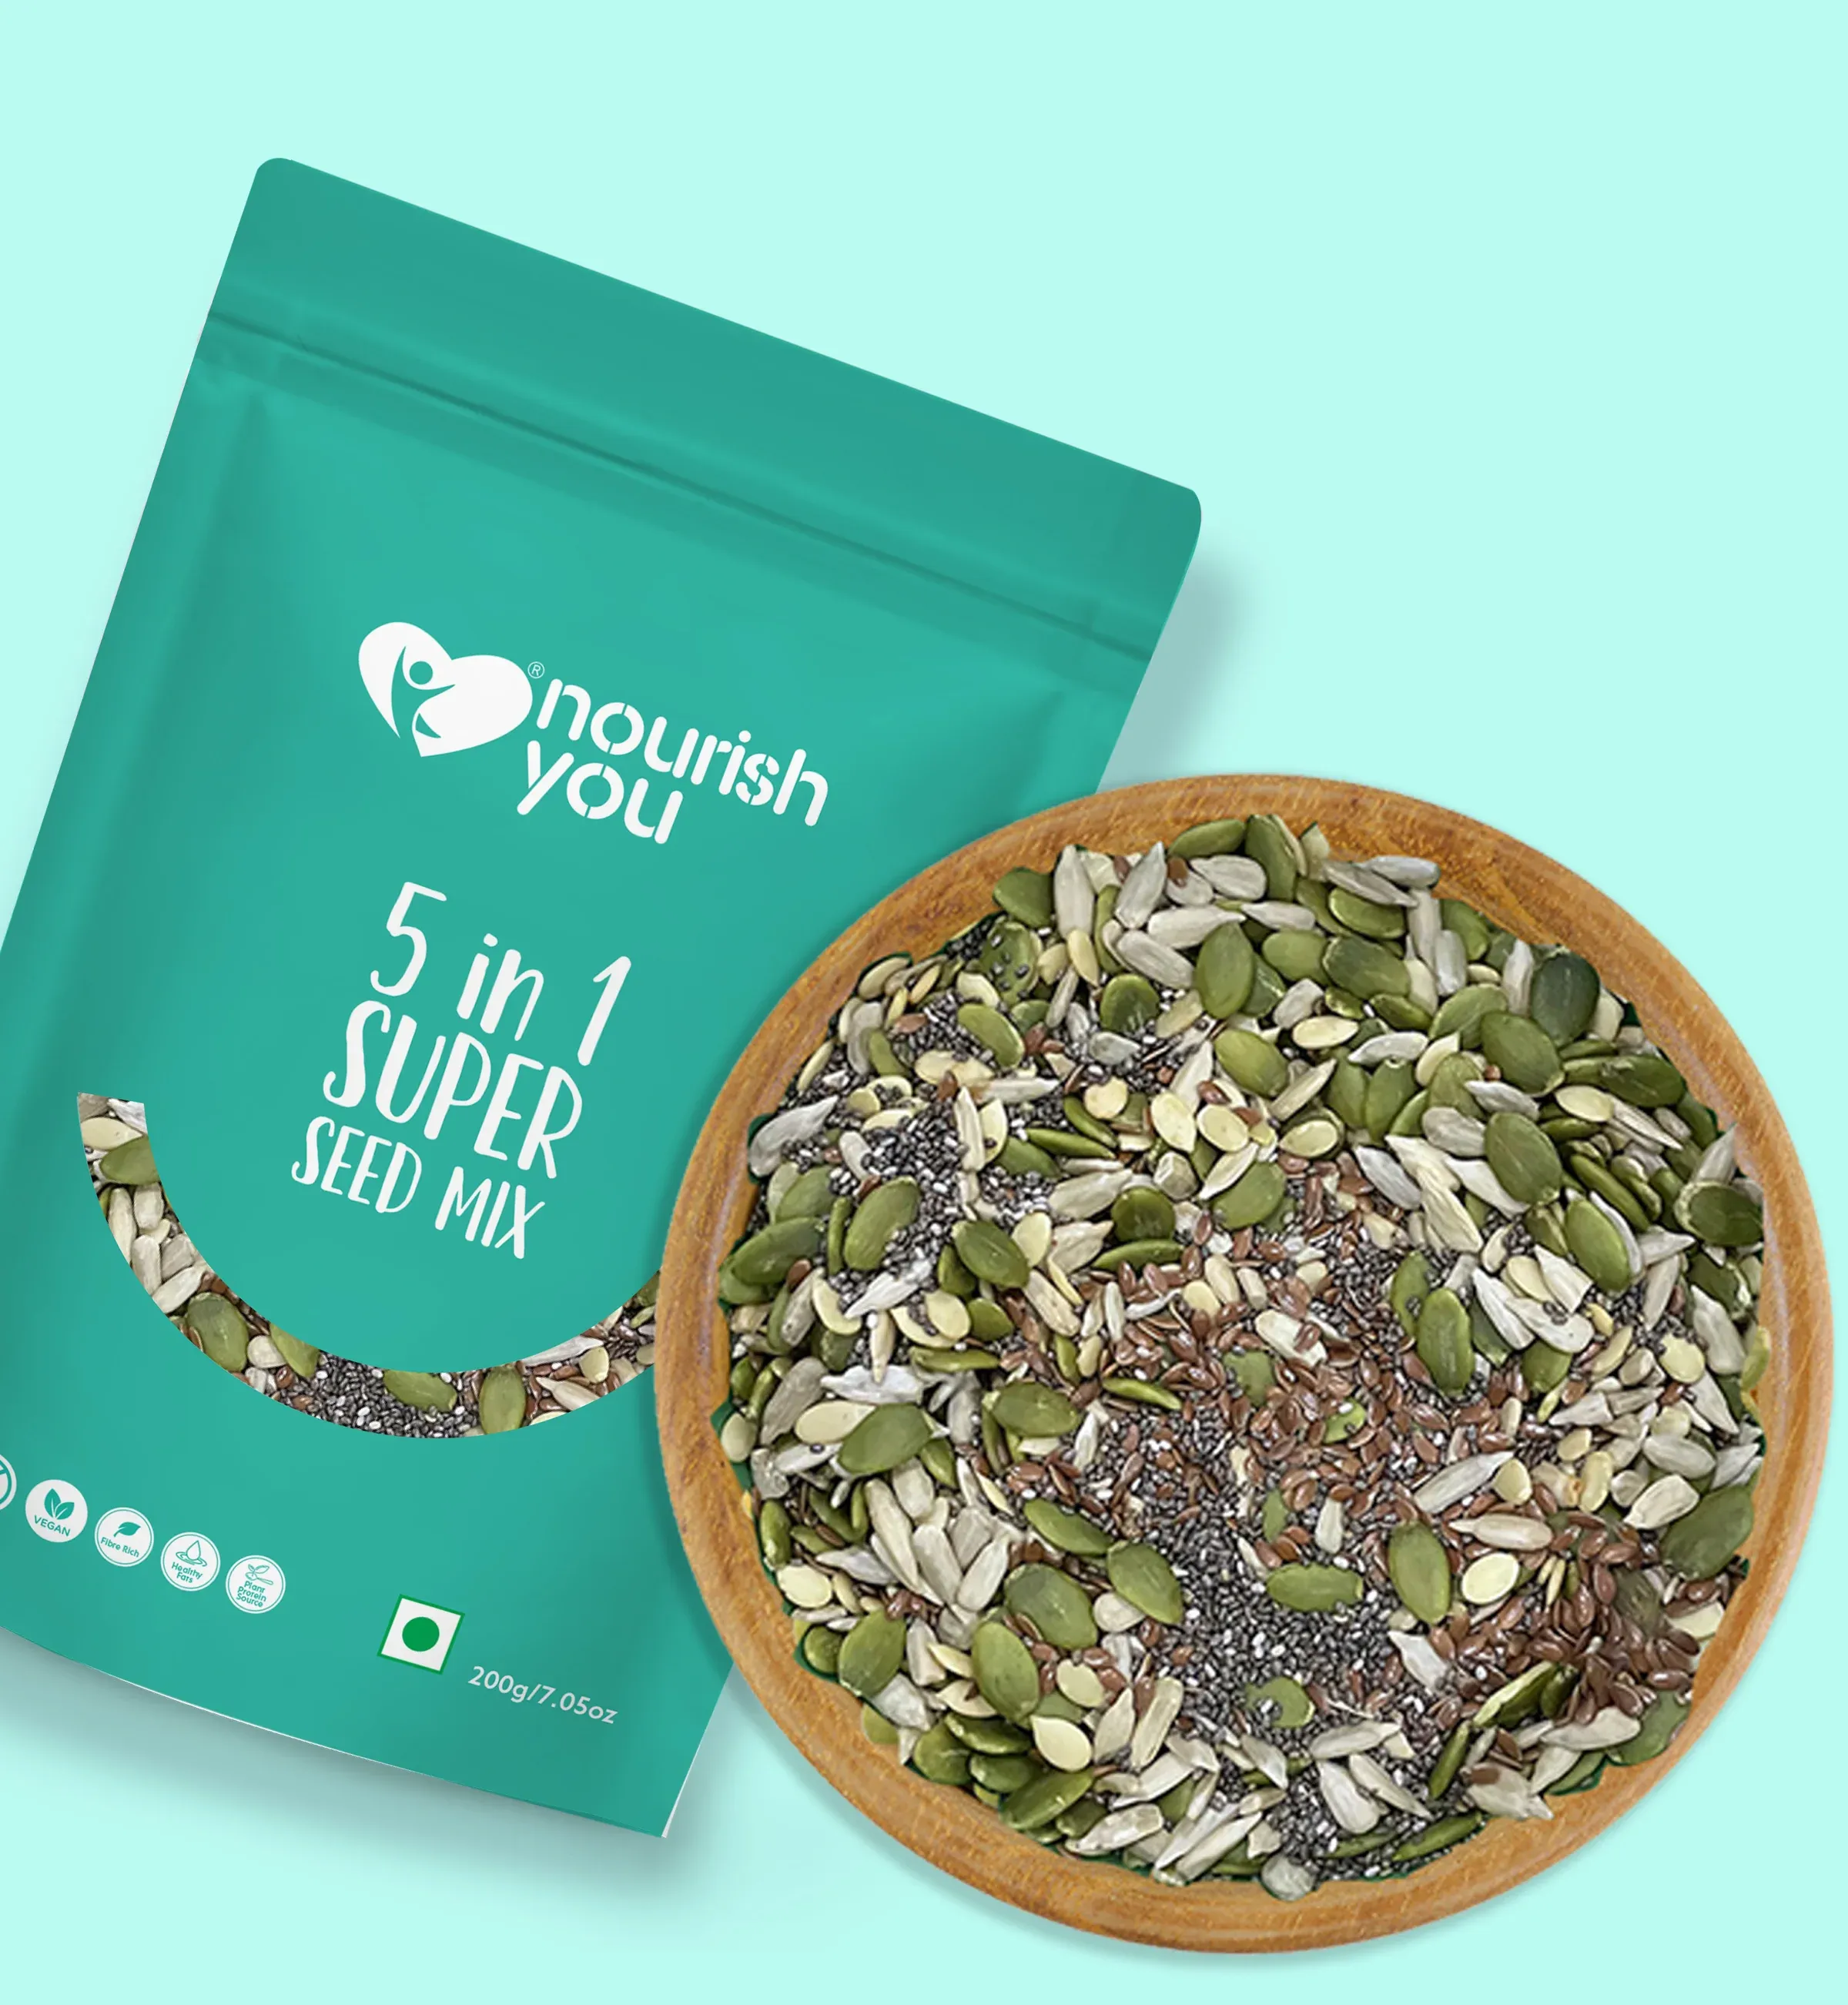 Nourish You 5 in 1 Super Seed Mix